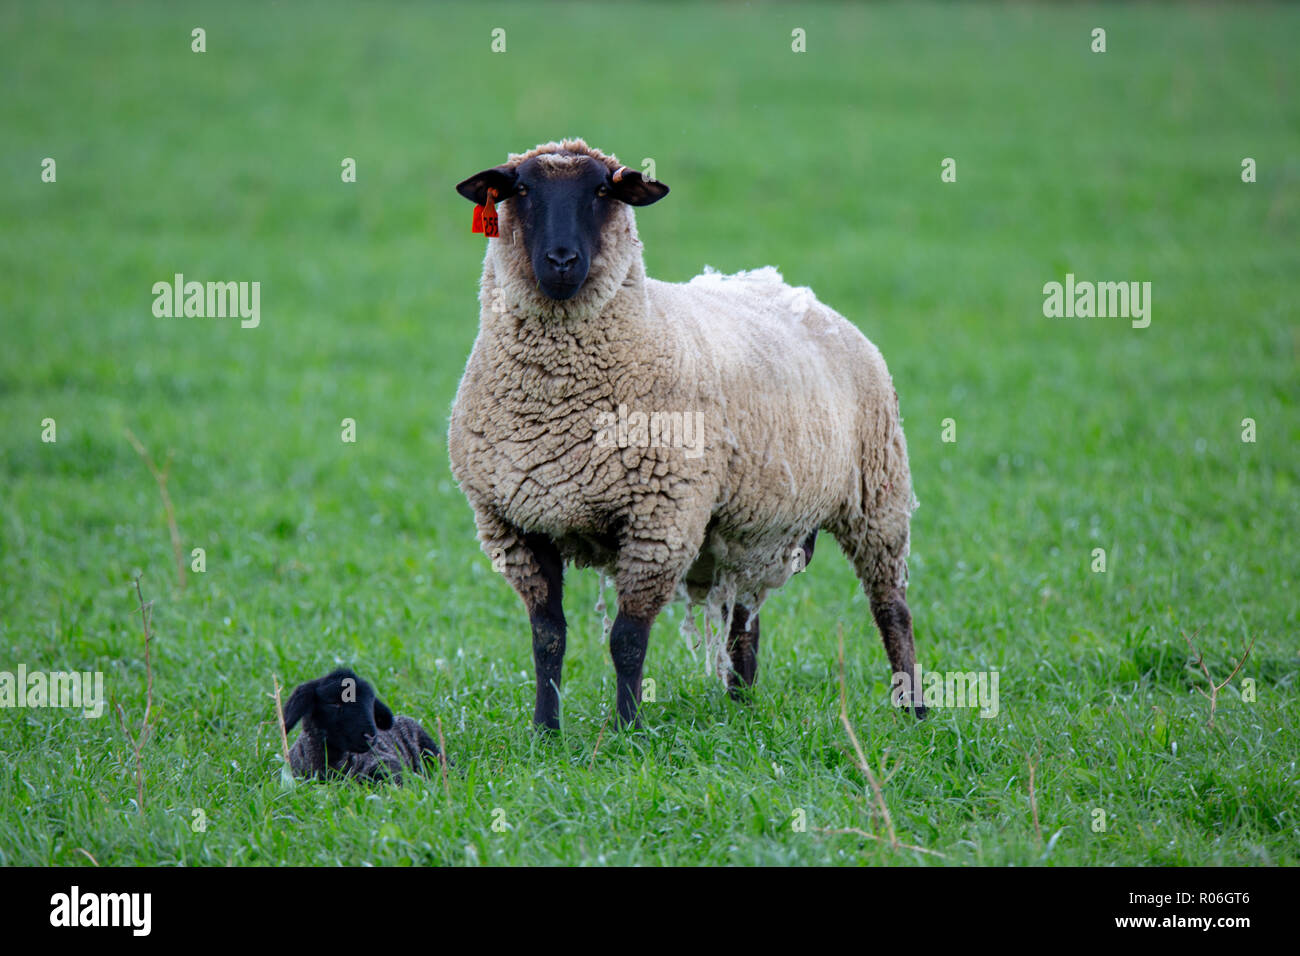 A mother suffolk ewe with her little black lamb in a grassy field Stock Photo